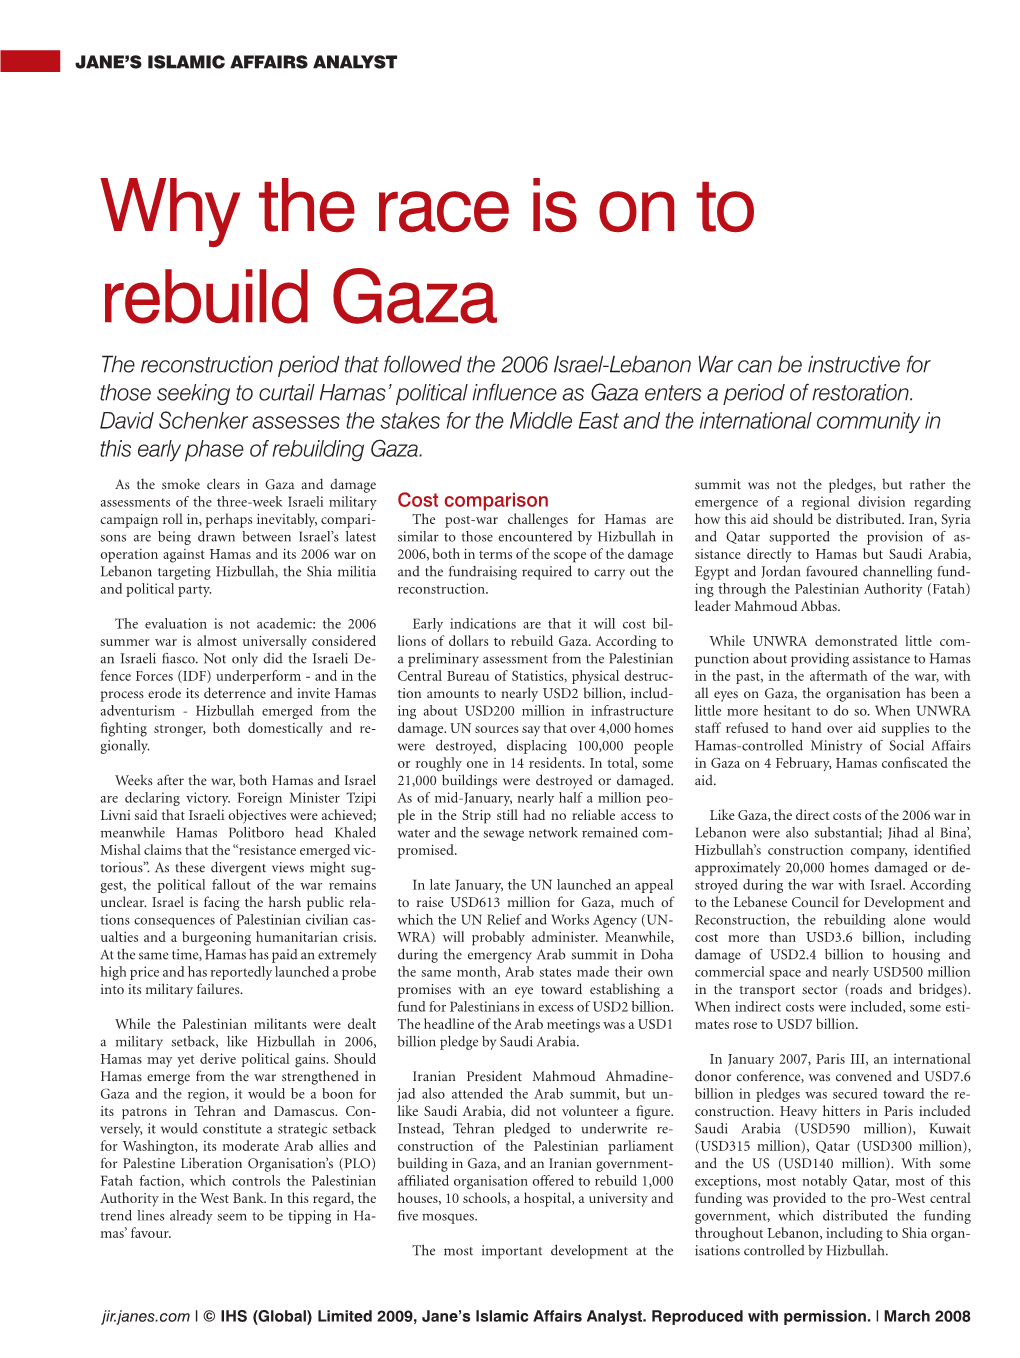 Why the Race Is on to Rebuild Gaza